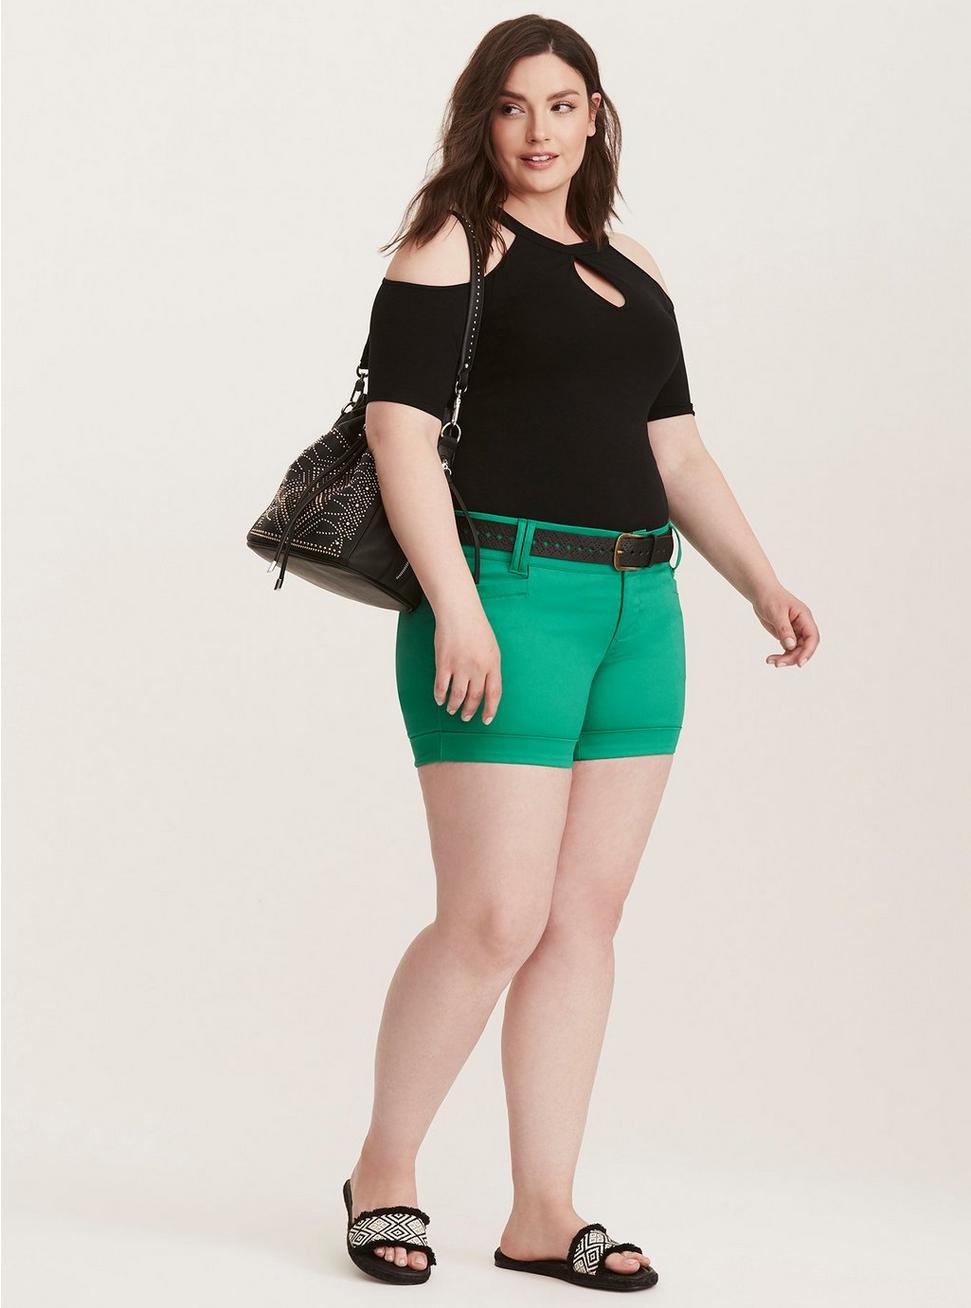 Sateen Belted Short - Green, JELLY BEAN, hi-res